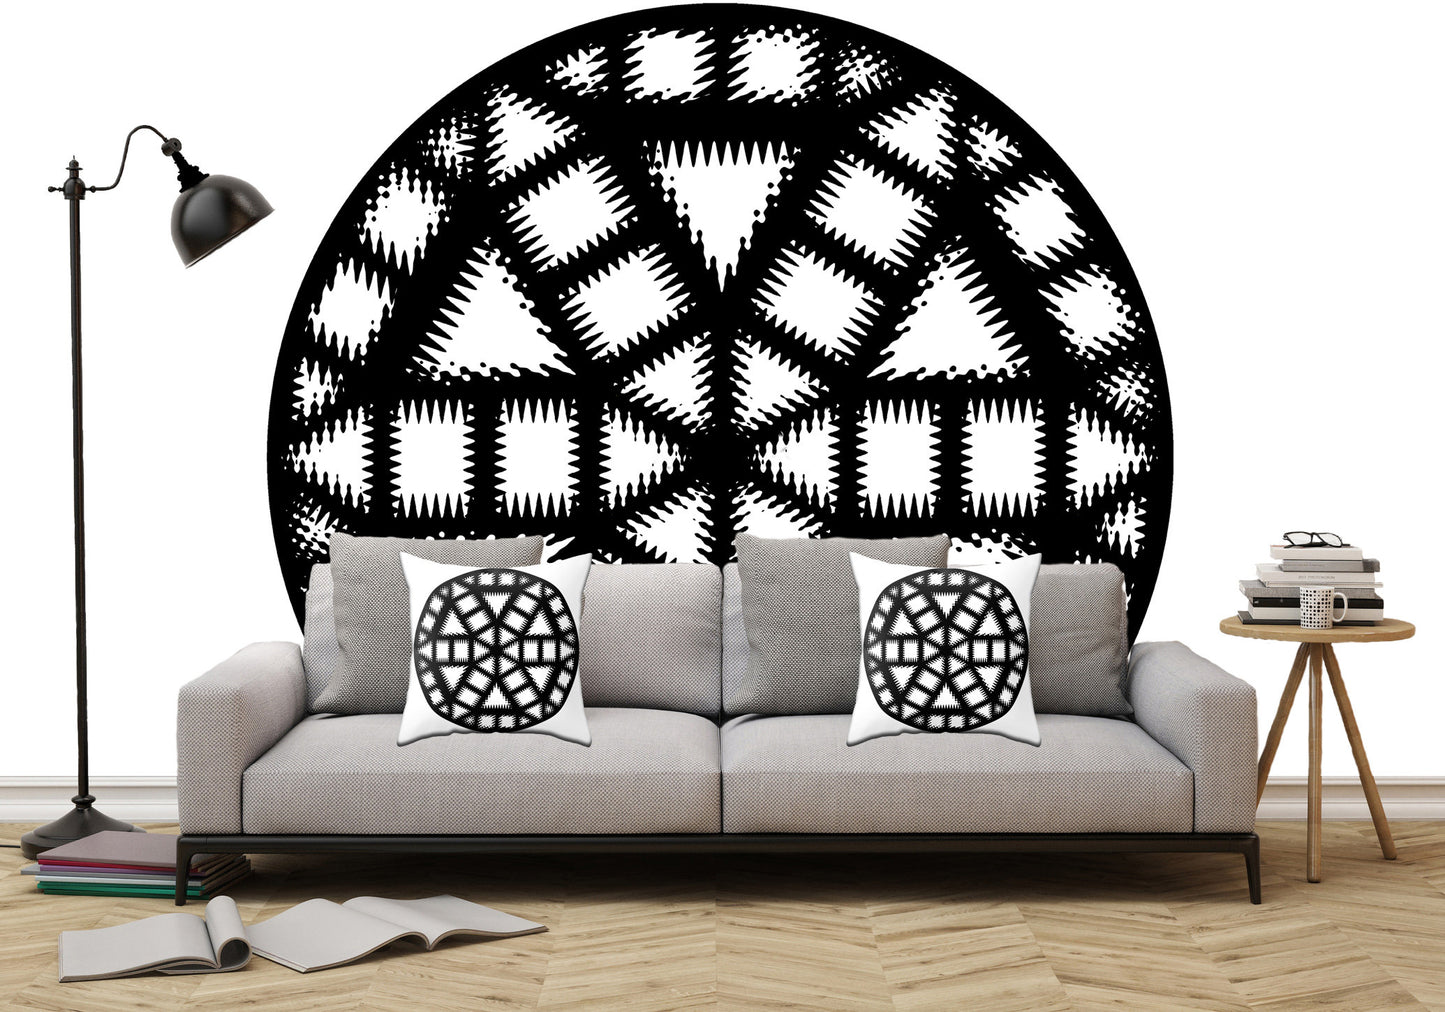 Single Black and White Pinwheel - Peel and Stick Removable Wallpaper Full Size Wall Mural  - PIPAFINEART